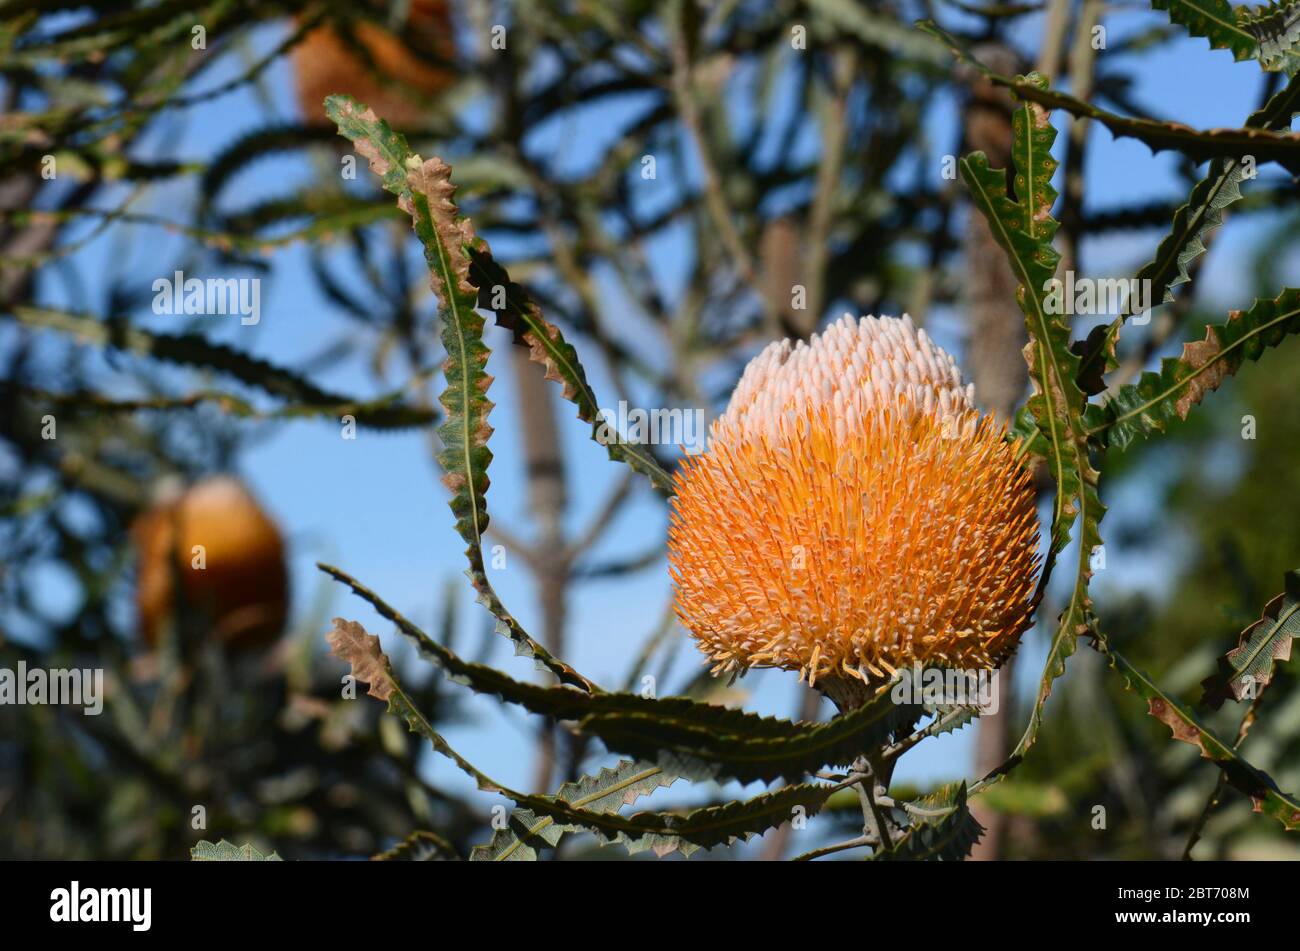 White and orange inflorescence of the Acorn Banksia, Banksia prionotes, family Proteaceae. Native to Western Australia.  Individual flowers open botto Stock Photo